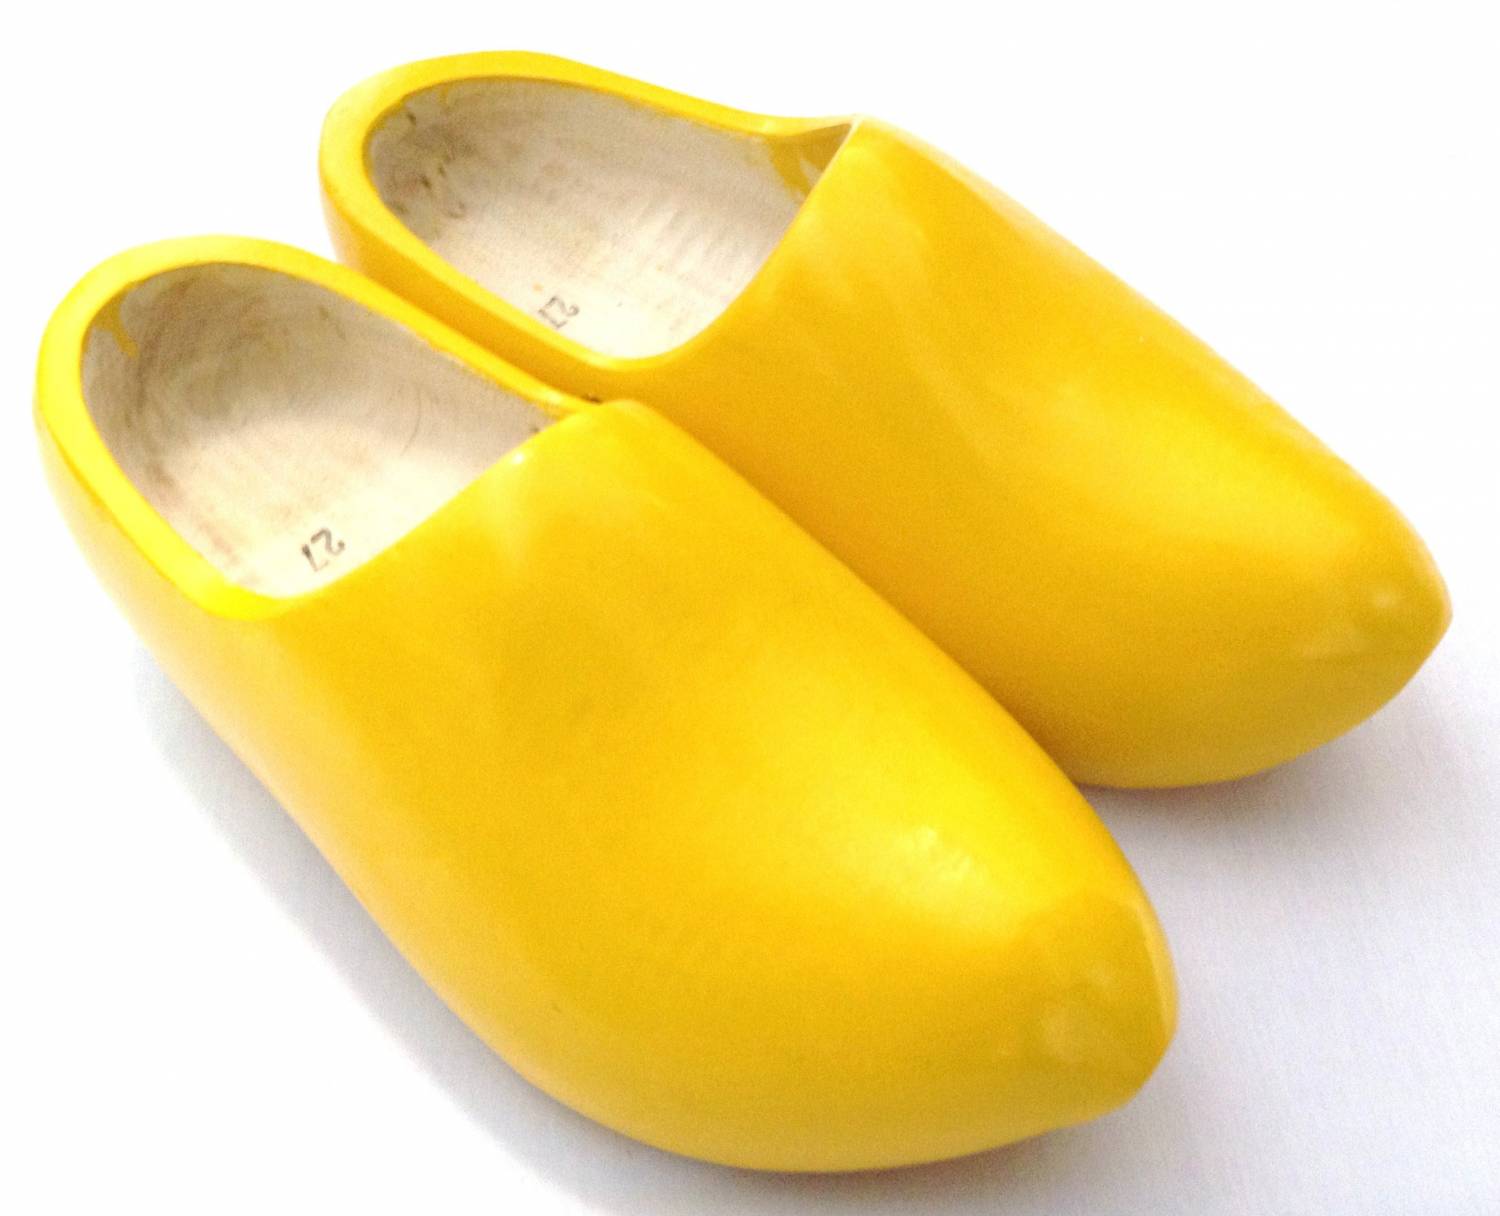 unique appearance of yellow wooden shoes